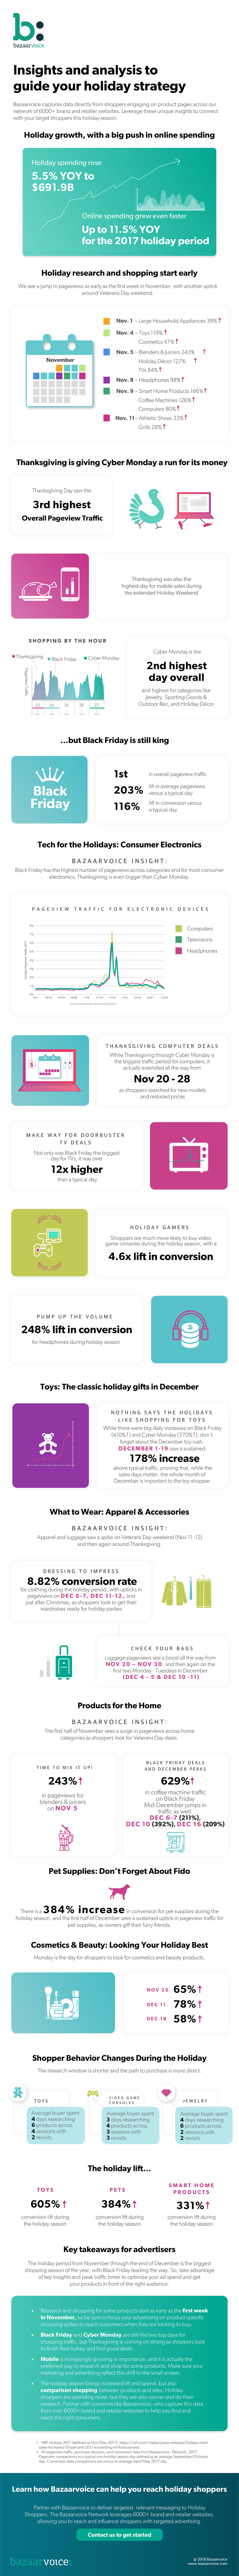 Insights and analysis to guide your holiday strategy